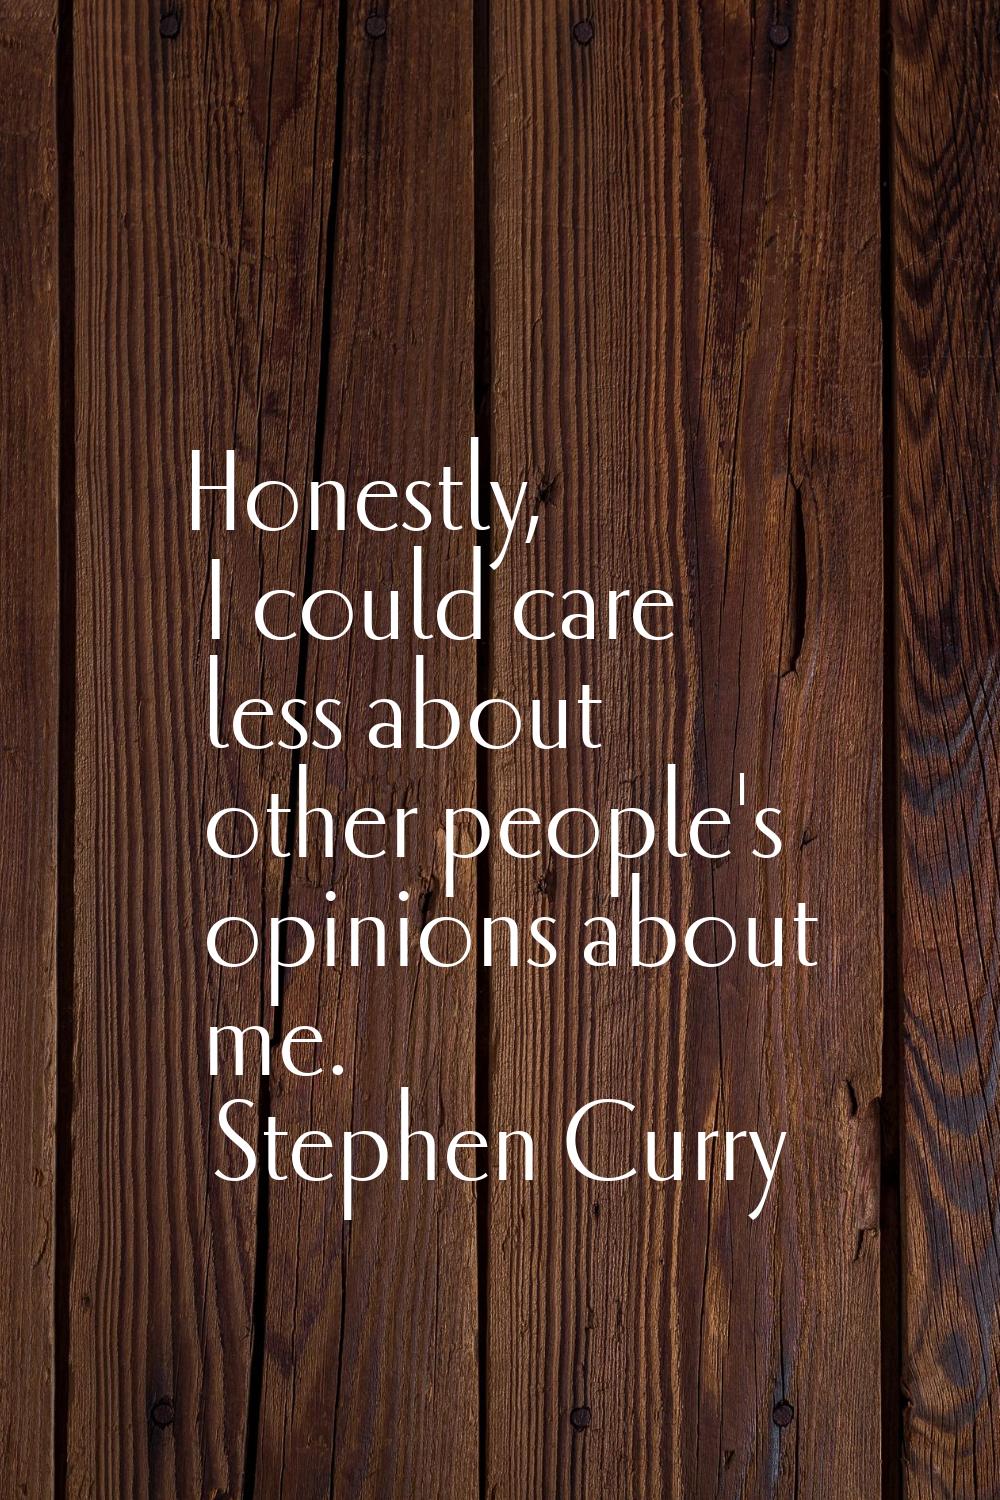 Honestly, I could care less about other people's opinions about me.